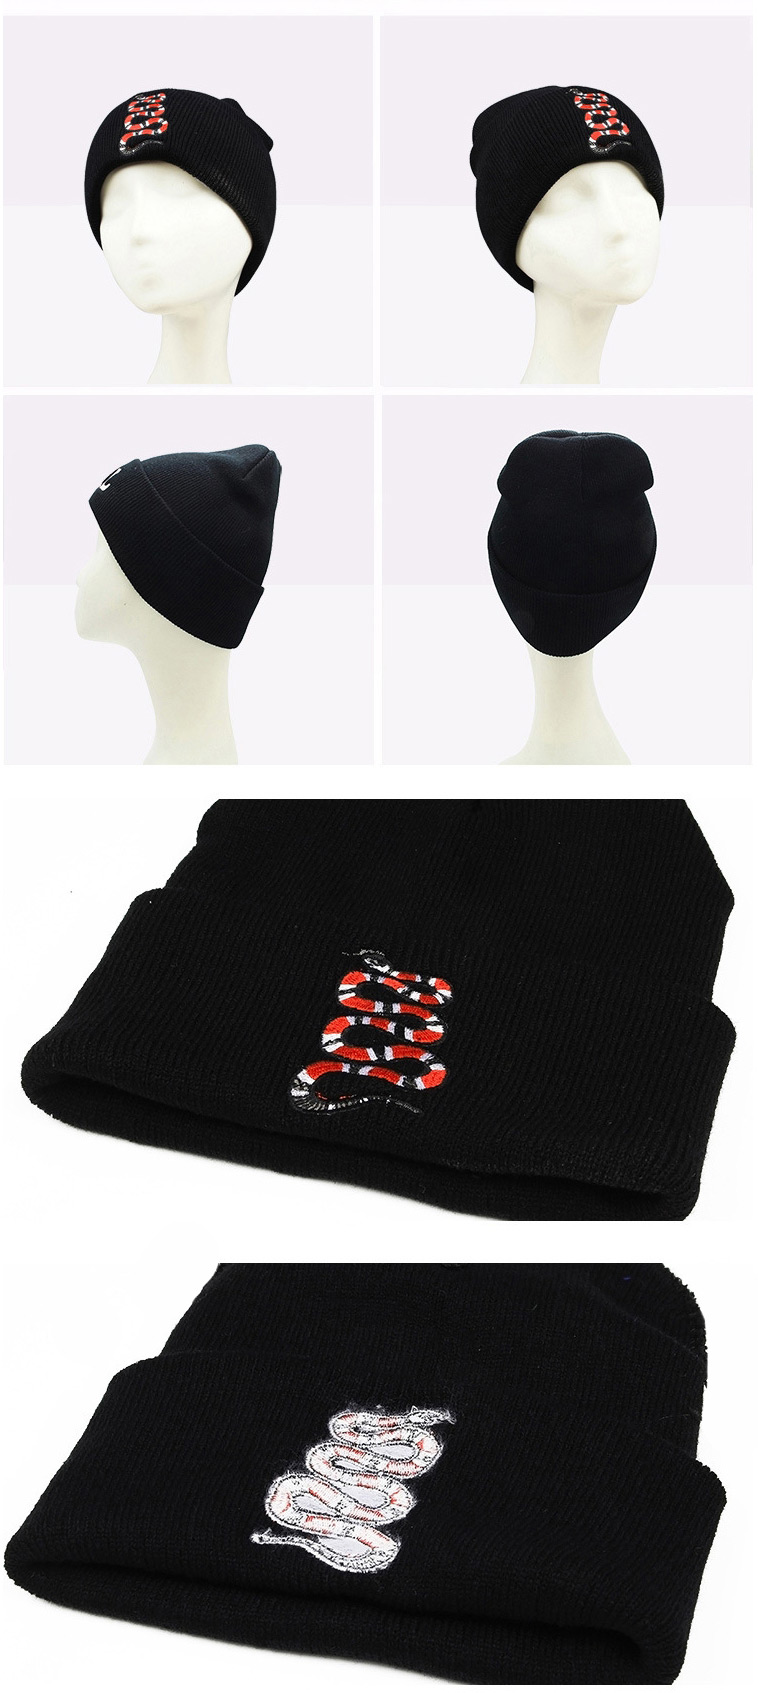 Fashion Blac+red Embroidery Snake Decorated Hat,Knitting Wool Hats